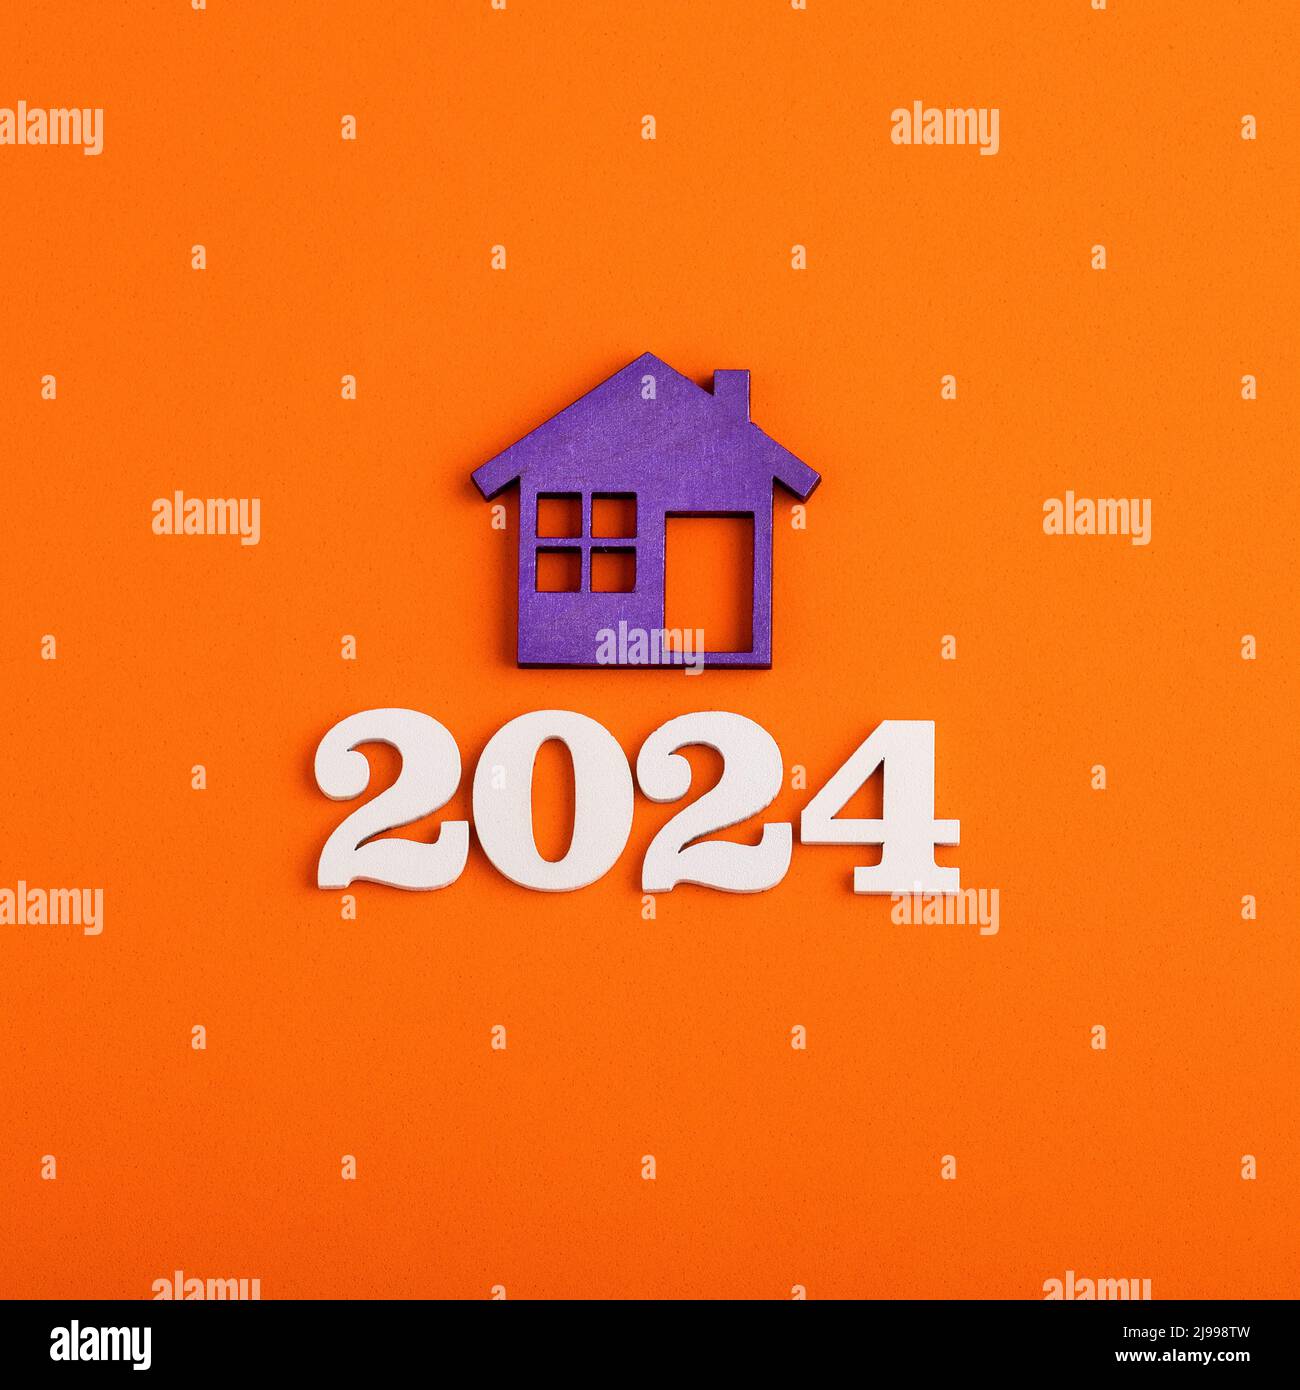 Home Buying And Selling Concept House And Year 2024 2J998TW 